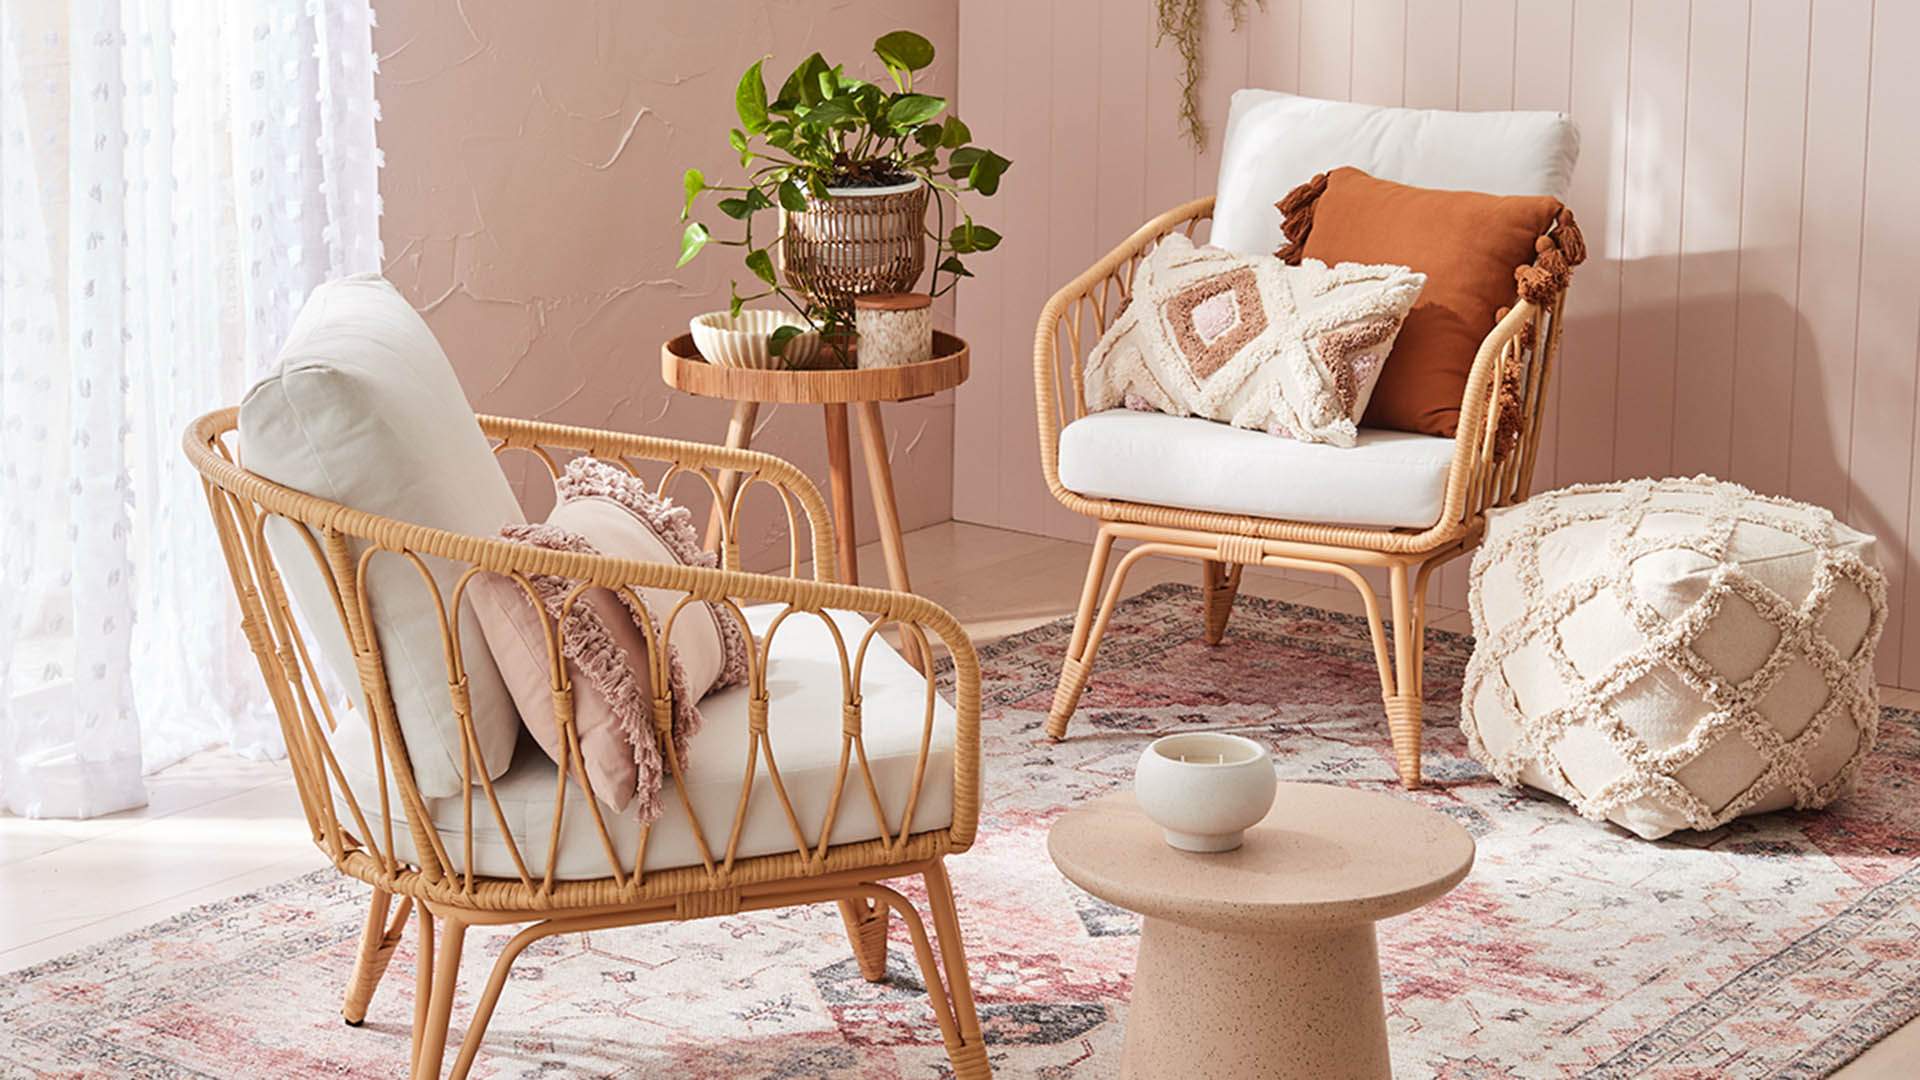 Kmart Has Unveiled All the New Boho and Beachy Homewares You'll Want to Fill Your House With ASAP